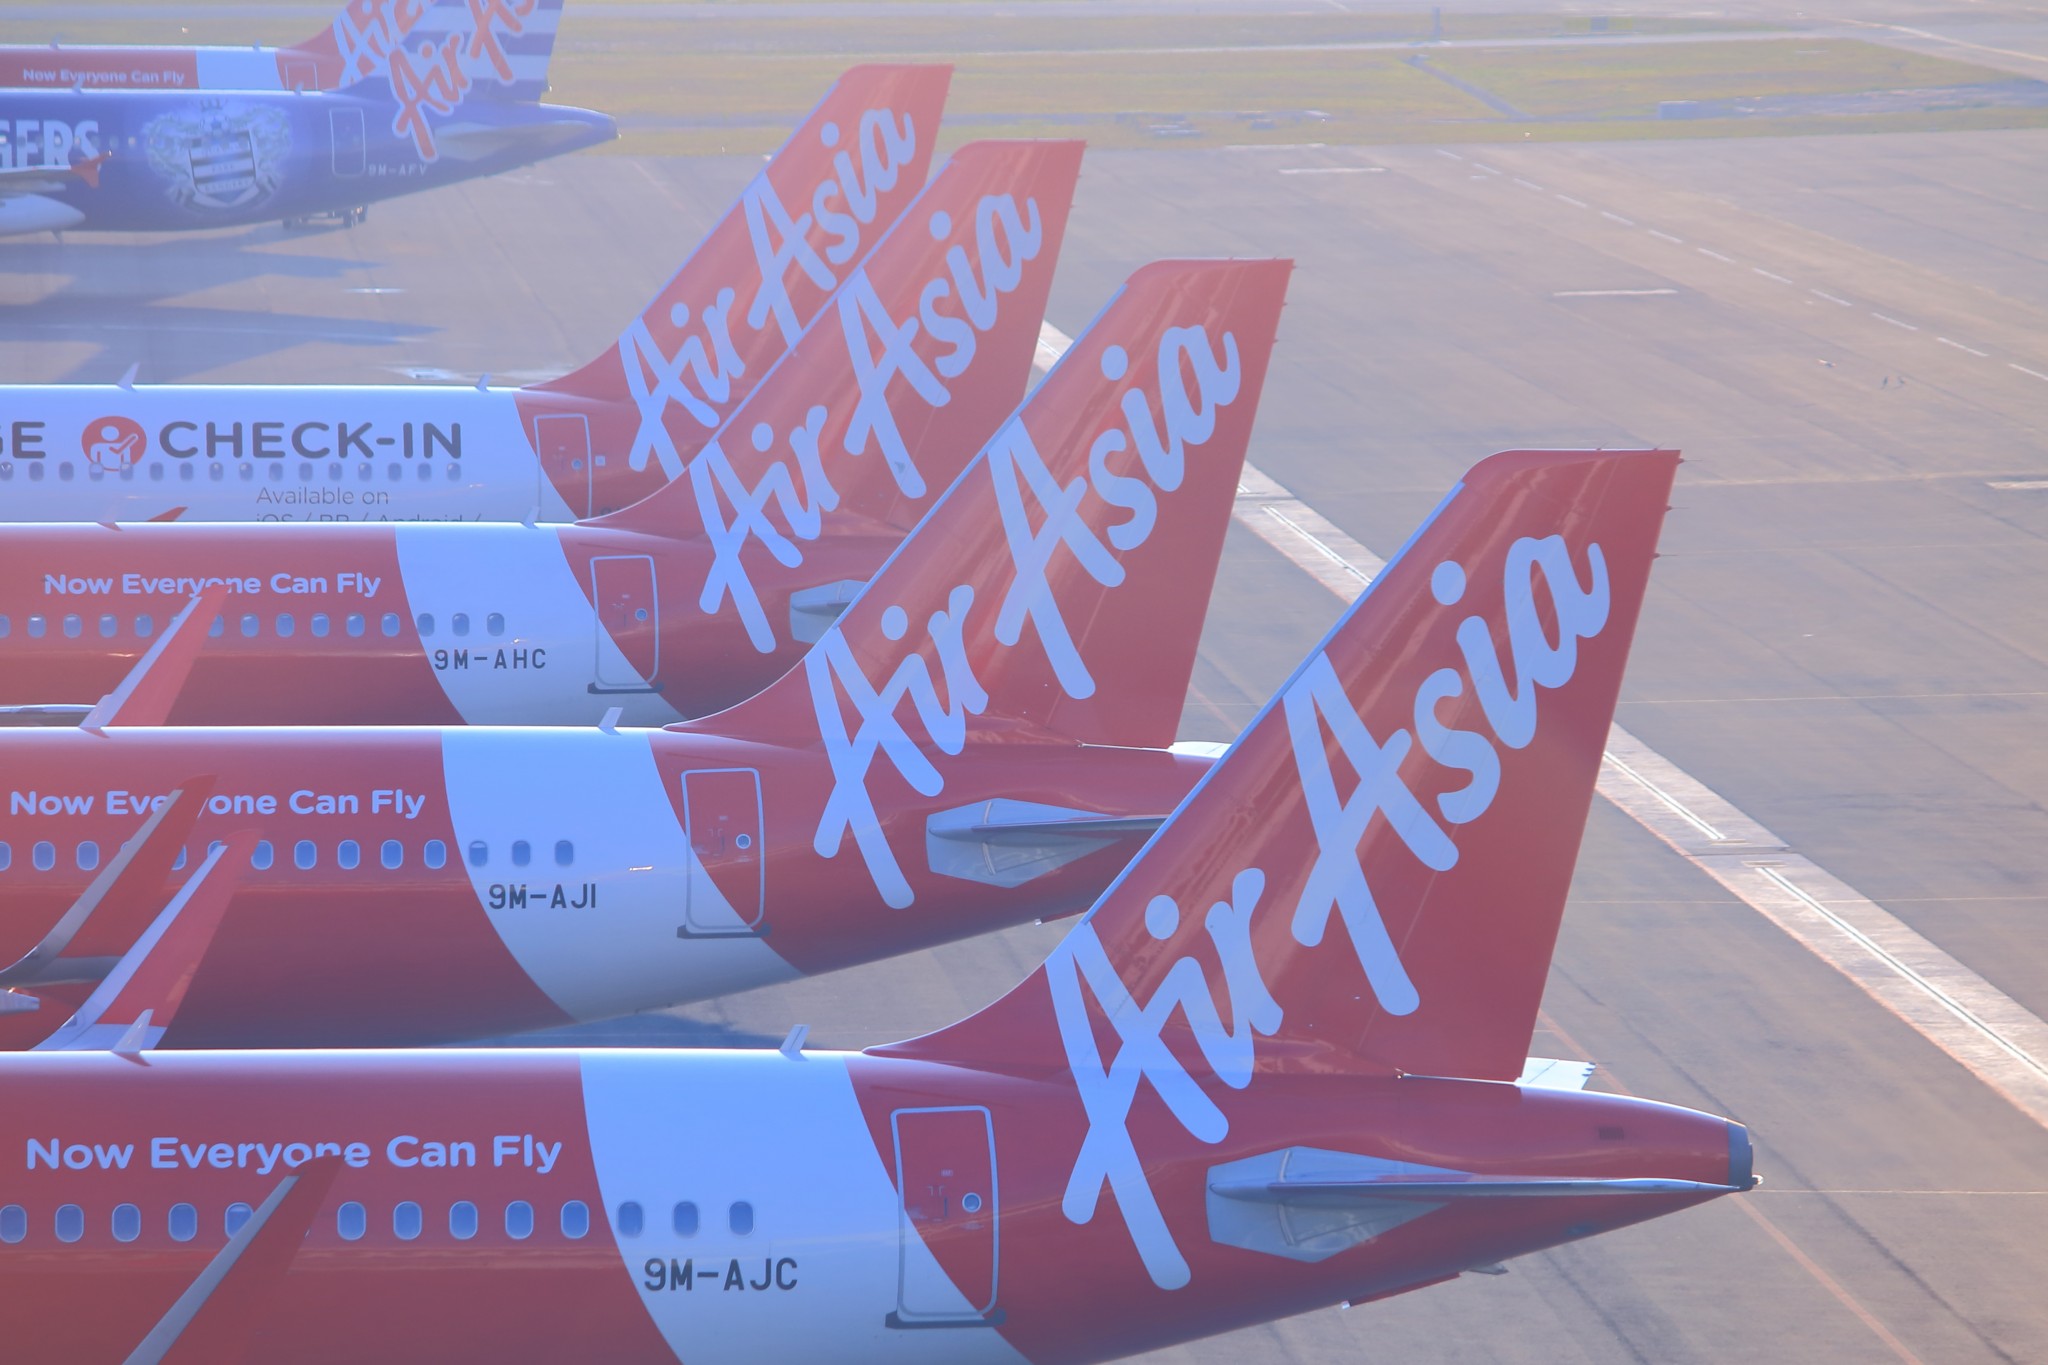 AirAsia confirms near completion of refund requests